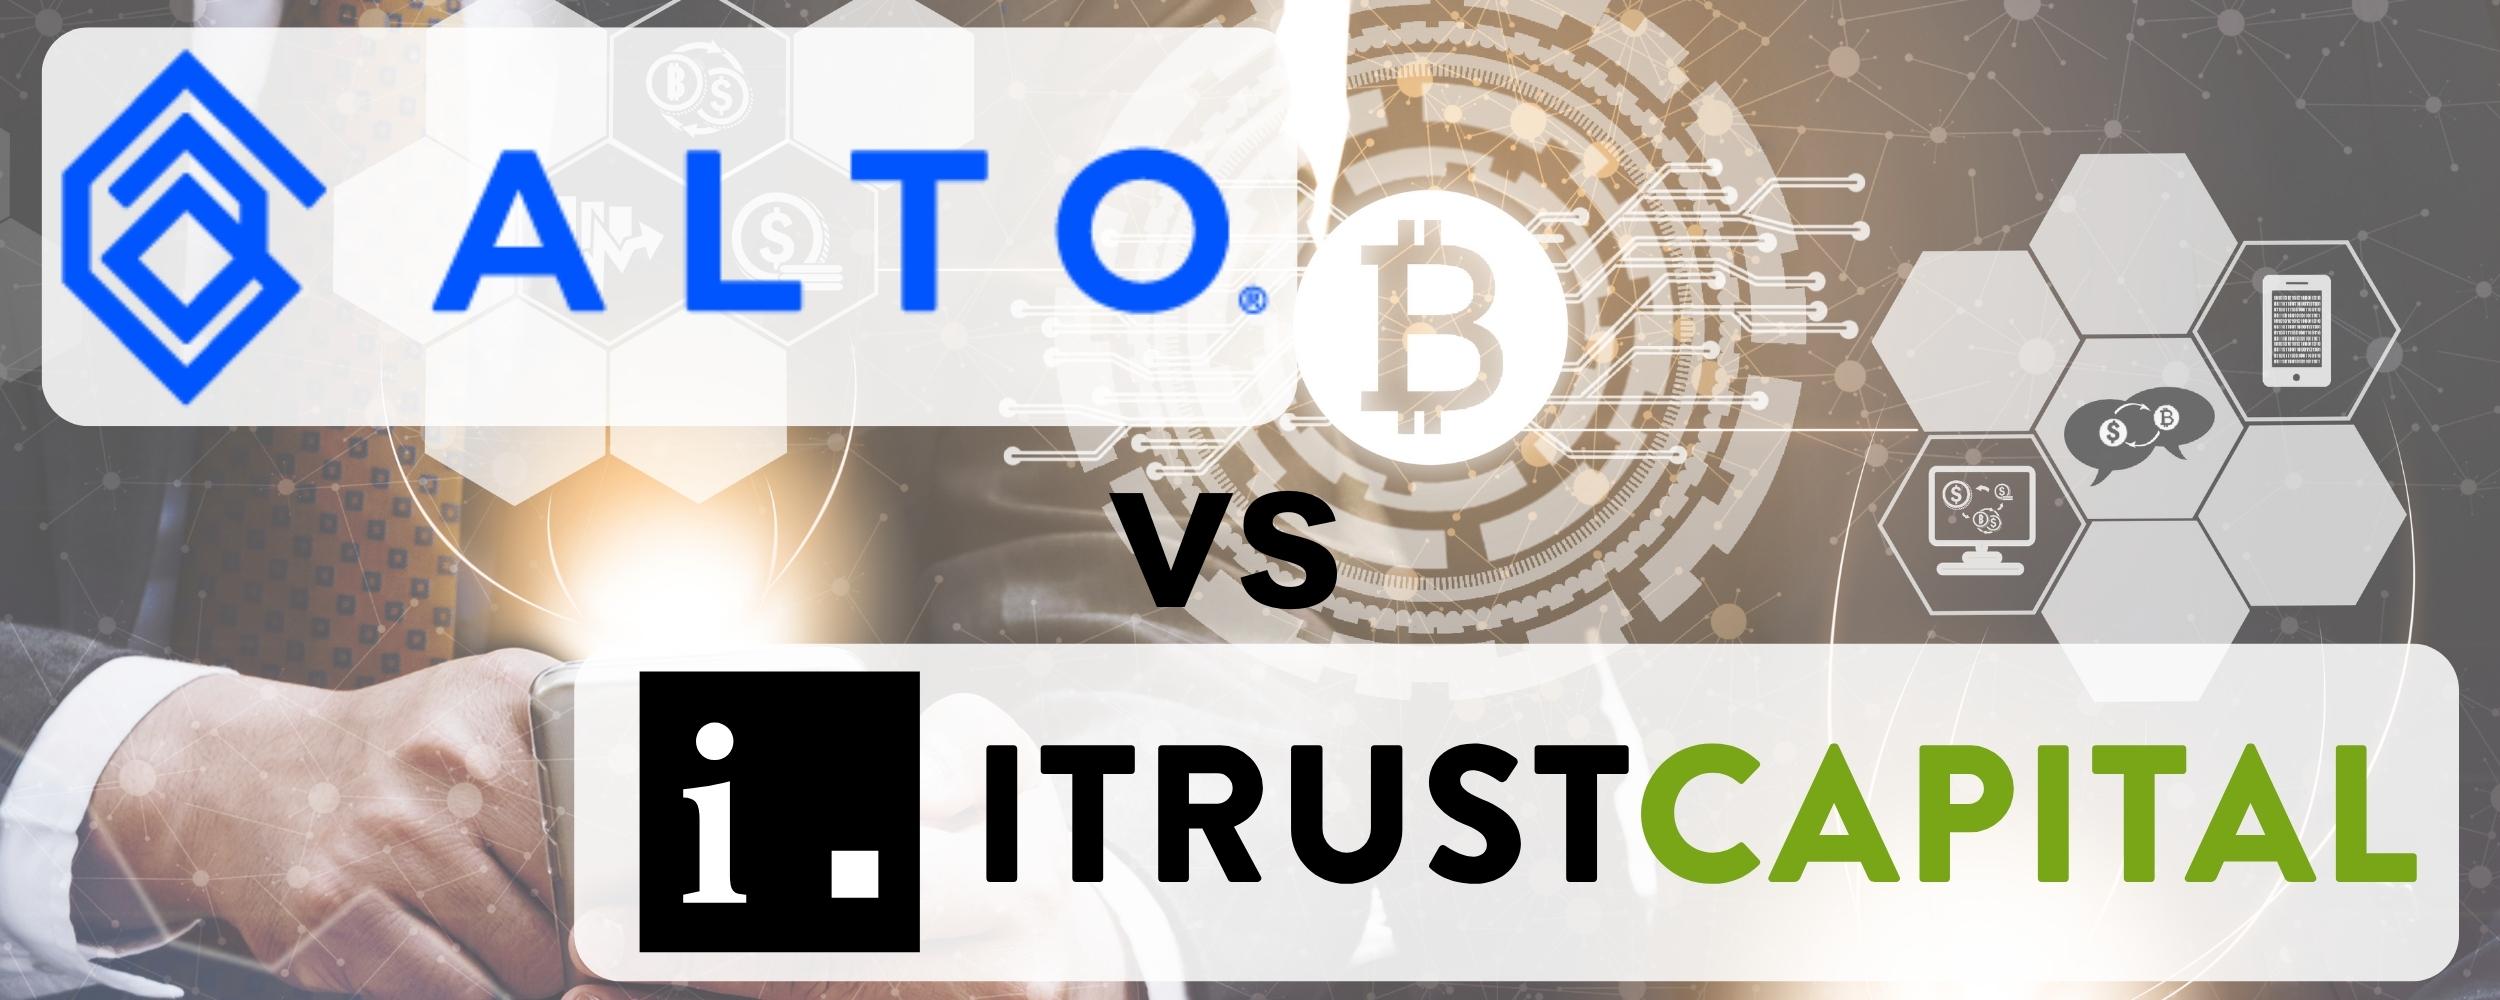 Photo of crypto coins with Alto and iTrustCapital logos